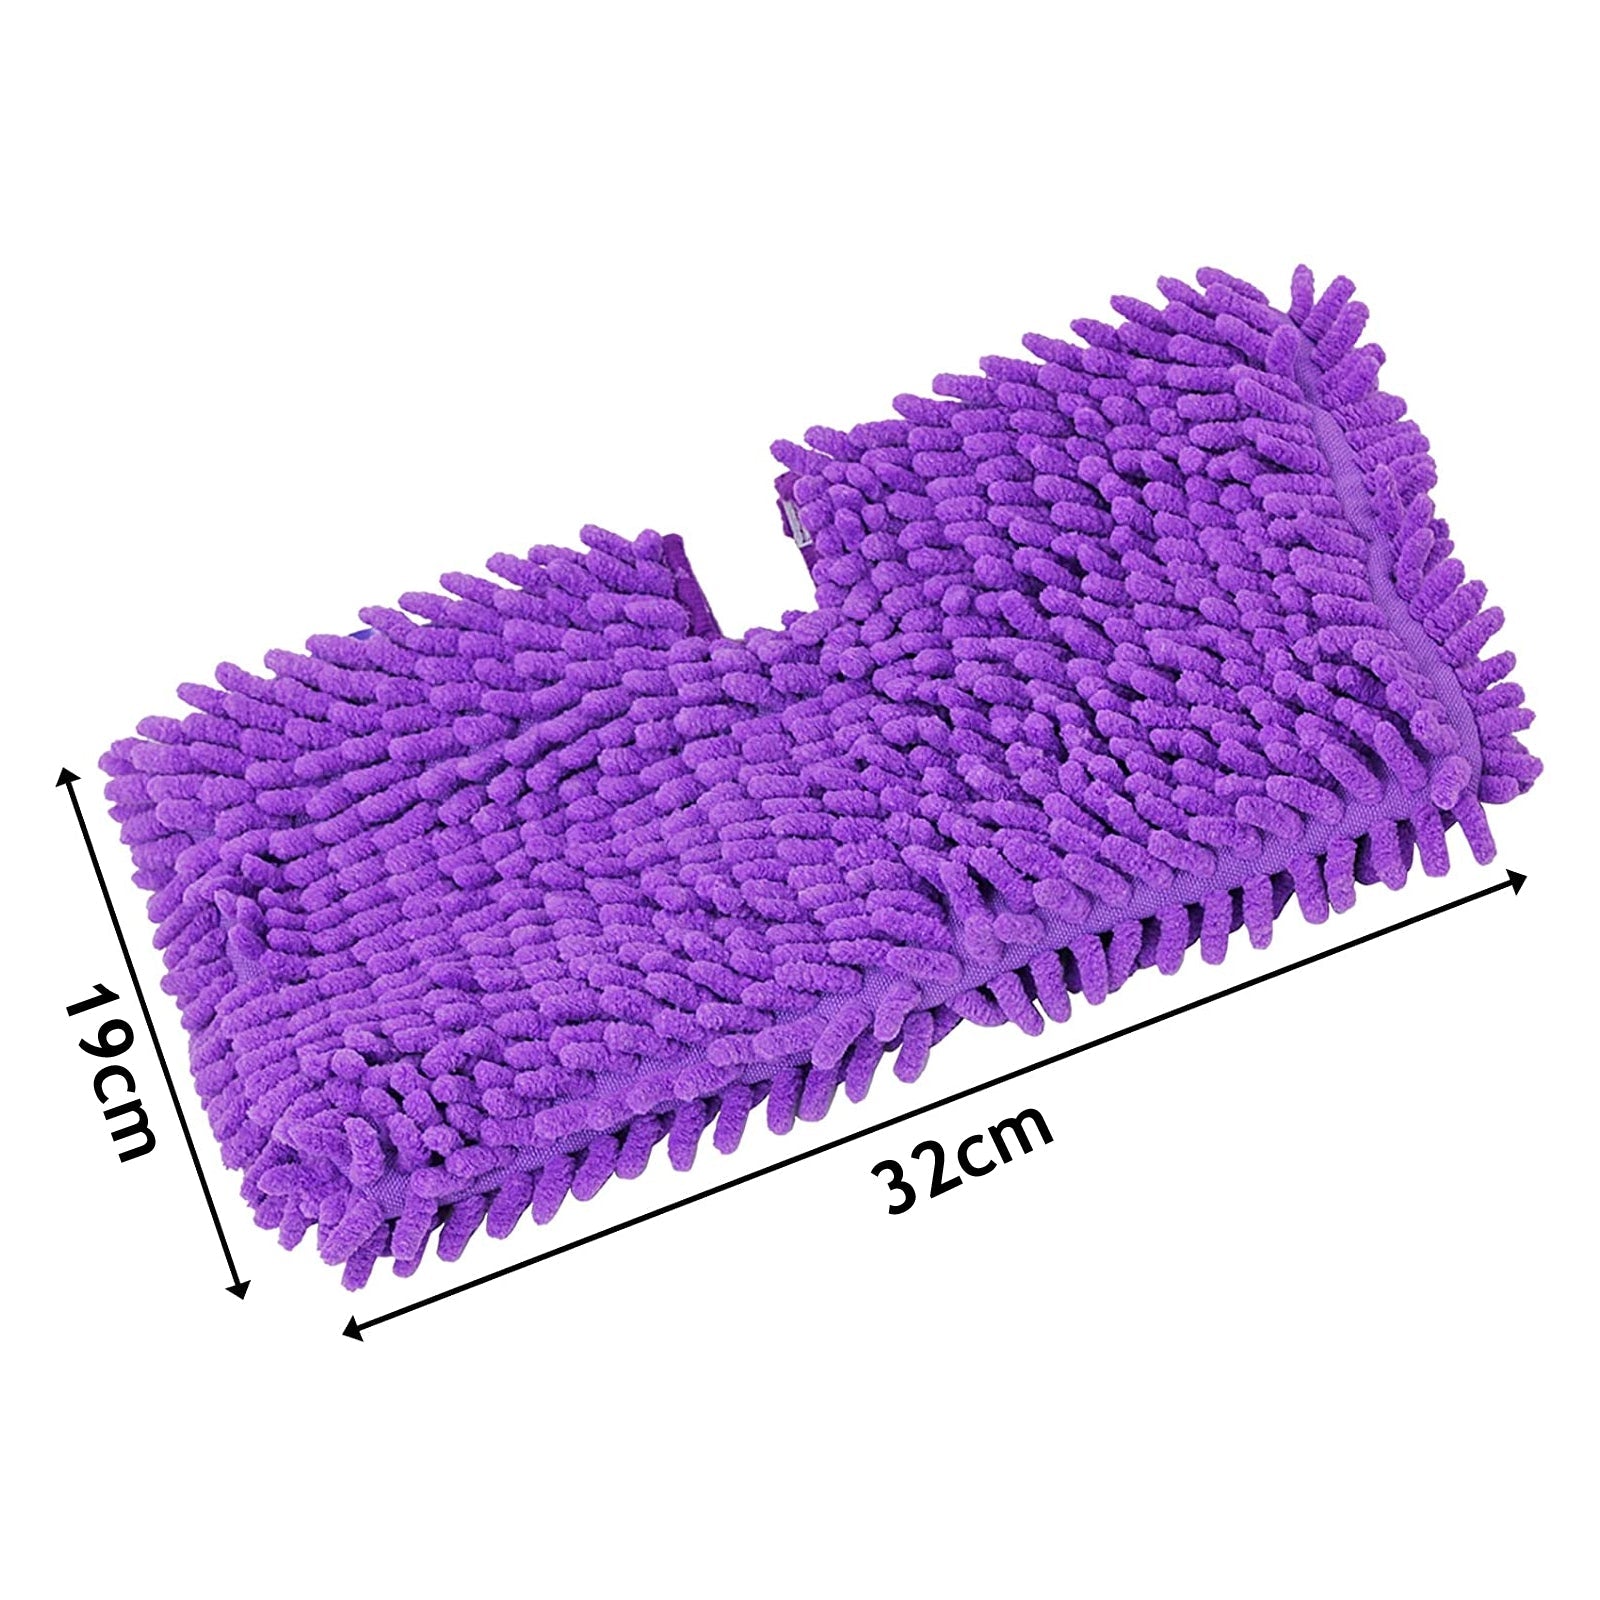 Steam Cleaner Cover Pads for Shark S3450 S3452 S3455K S3550 SE400 SE450 Mop (Pack of 8, Purple)